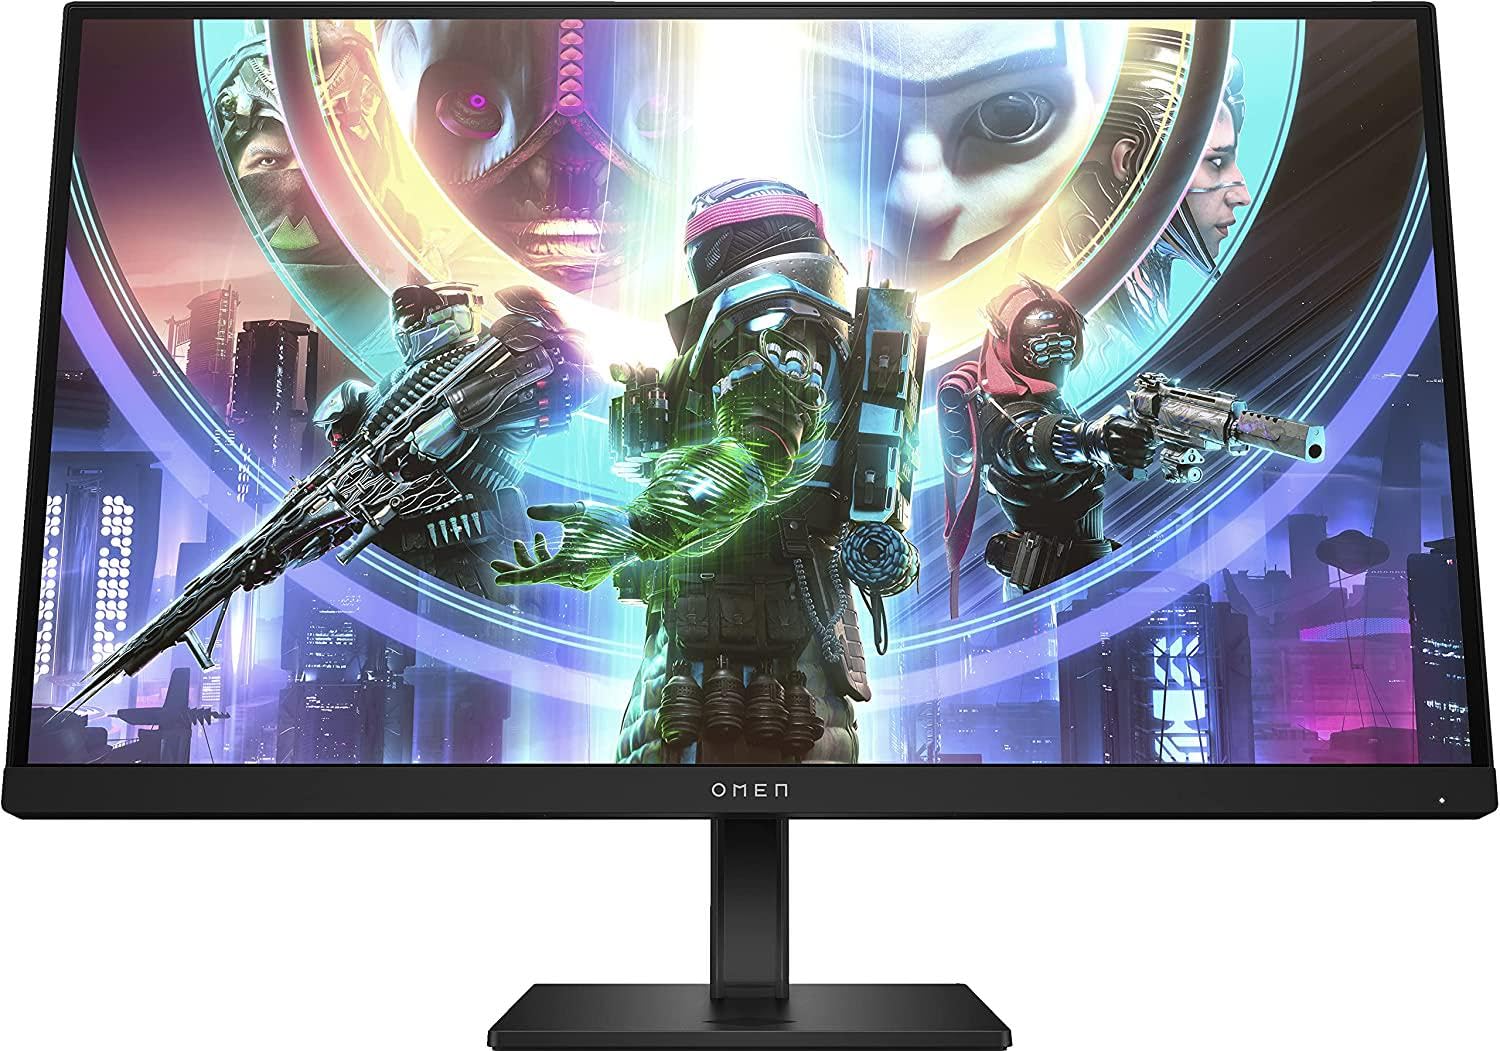 OMEN 27S FHD GAMING MONITOR